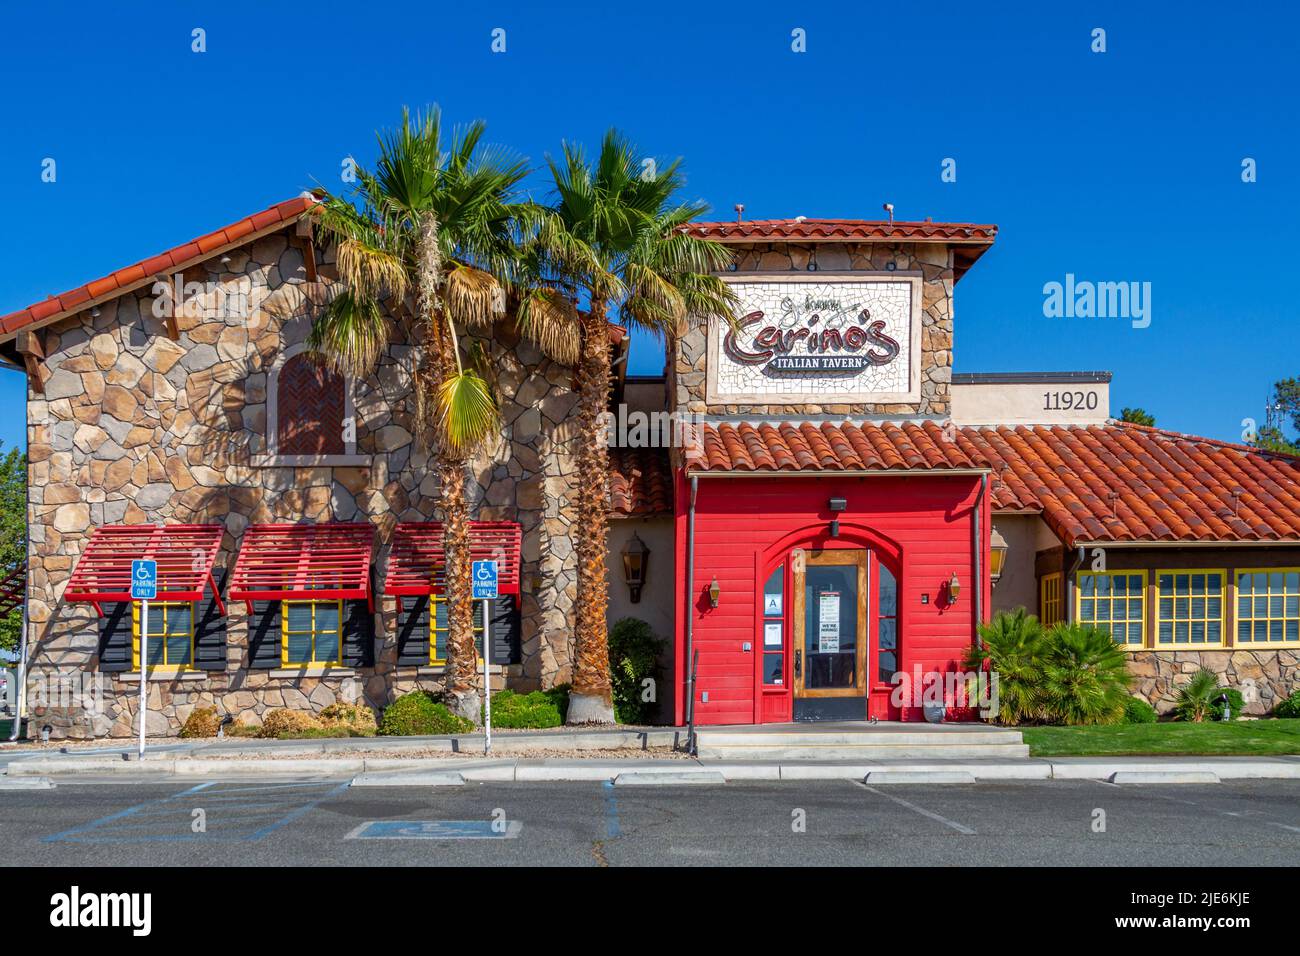 Victorville, CA, USA – June 23, 2022: Building exterior of Johnny Carino’s Italian Restaurant with green grass and palm trees in Victorville, Californ Stock Photo